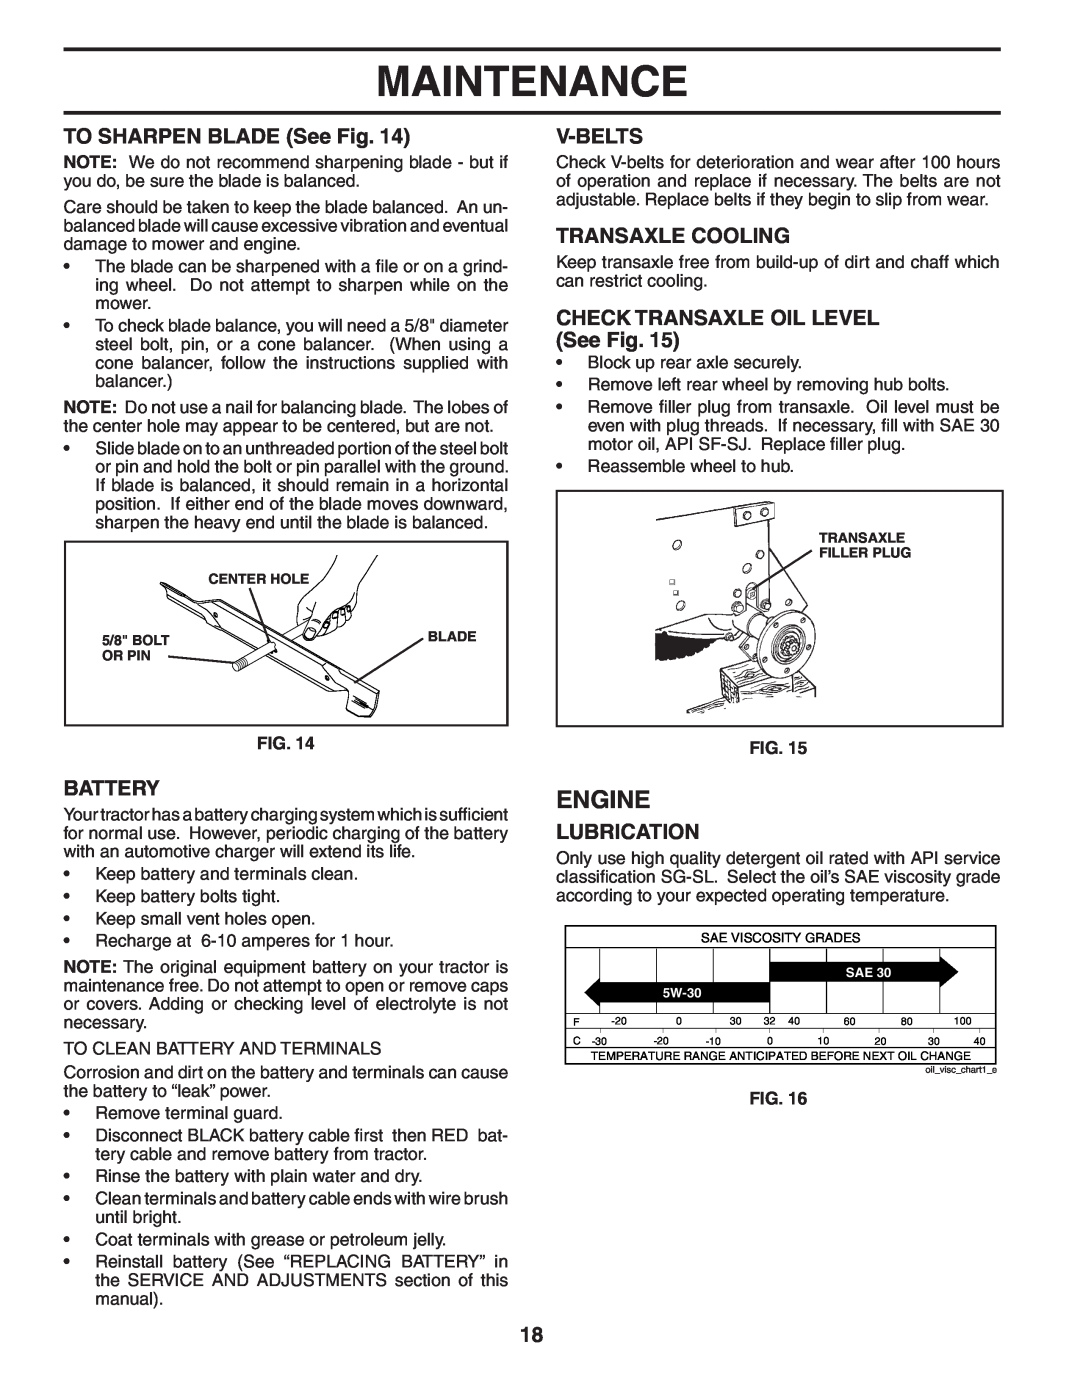 Poulan 194604 Engine, TO SHARPEN BLADE See Fig, V-Belts, Transaxle Cooling, CHECK TRANSAXLE OIL LEVEL See Fig, Battery 